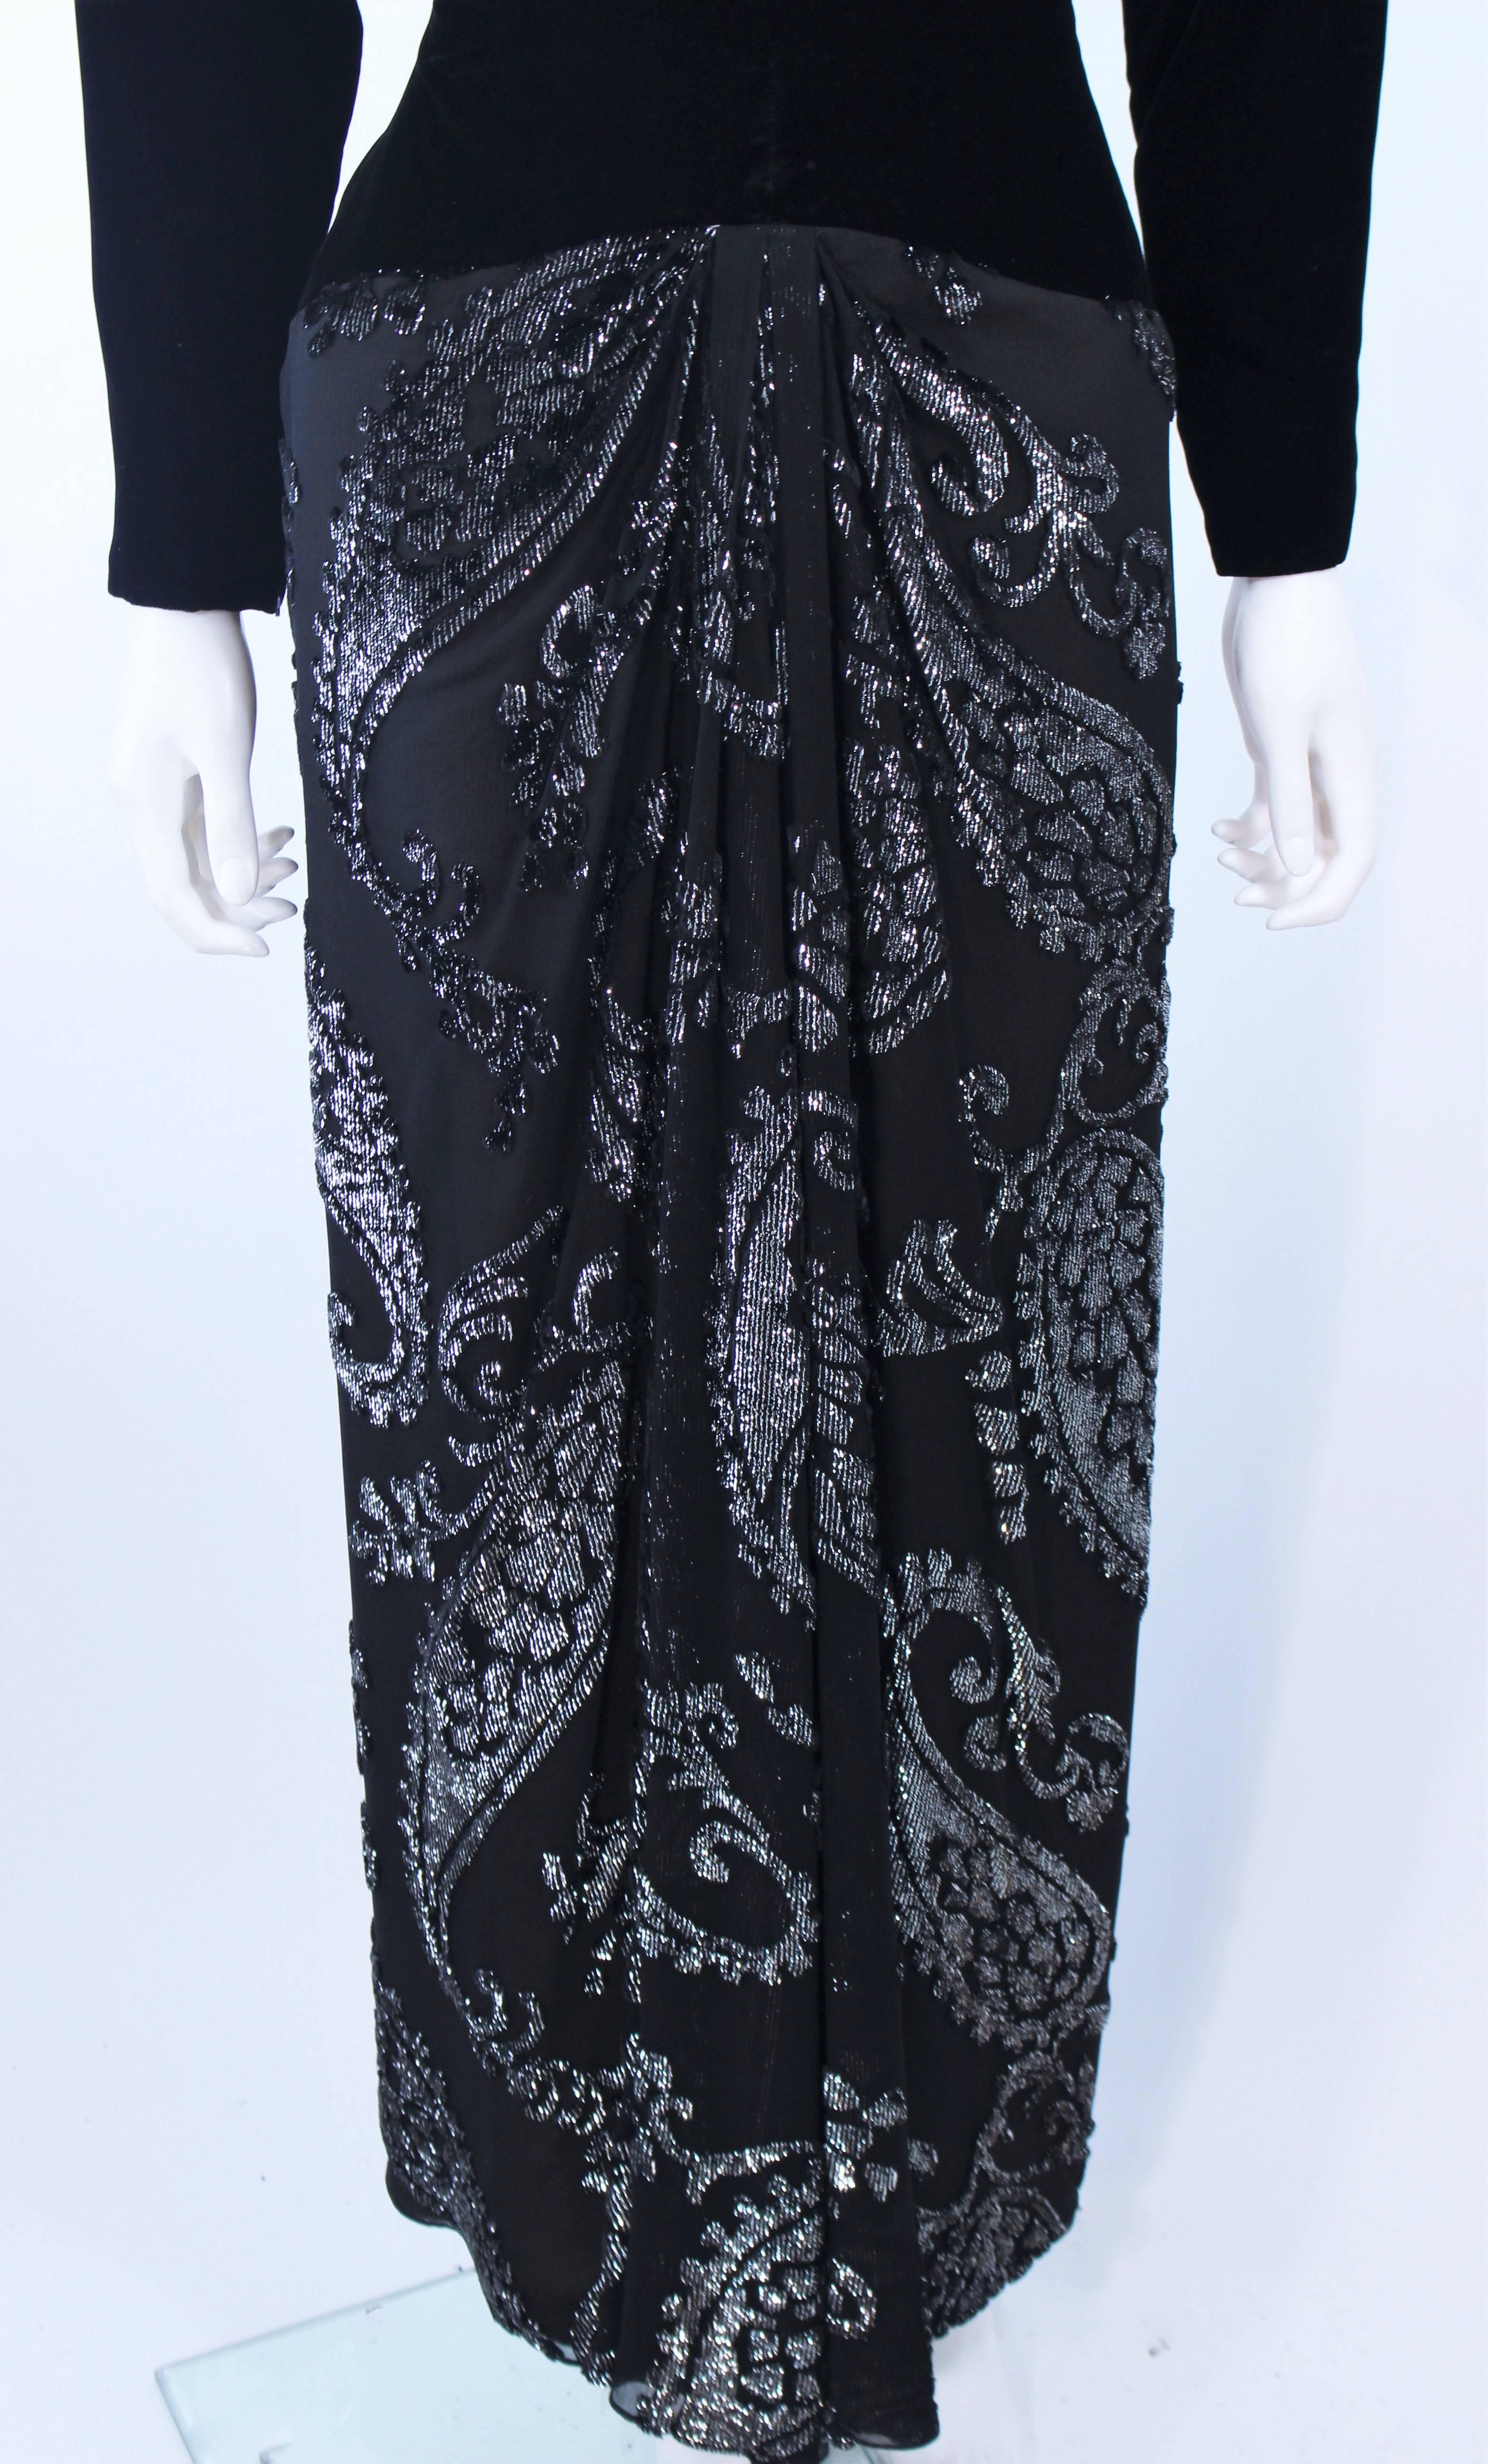 FRANK TIGNINO Velvet and Silk Lame Black & Silver Gown Size 6 For Sale 1